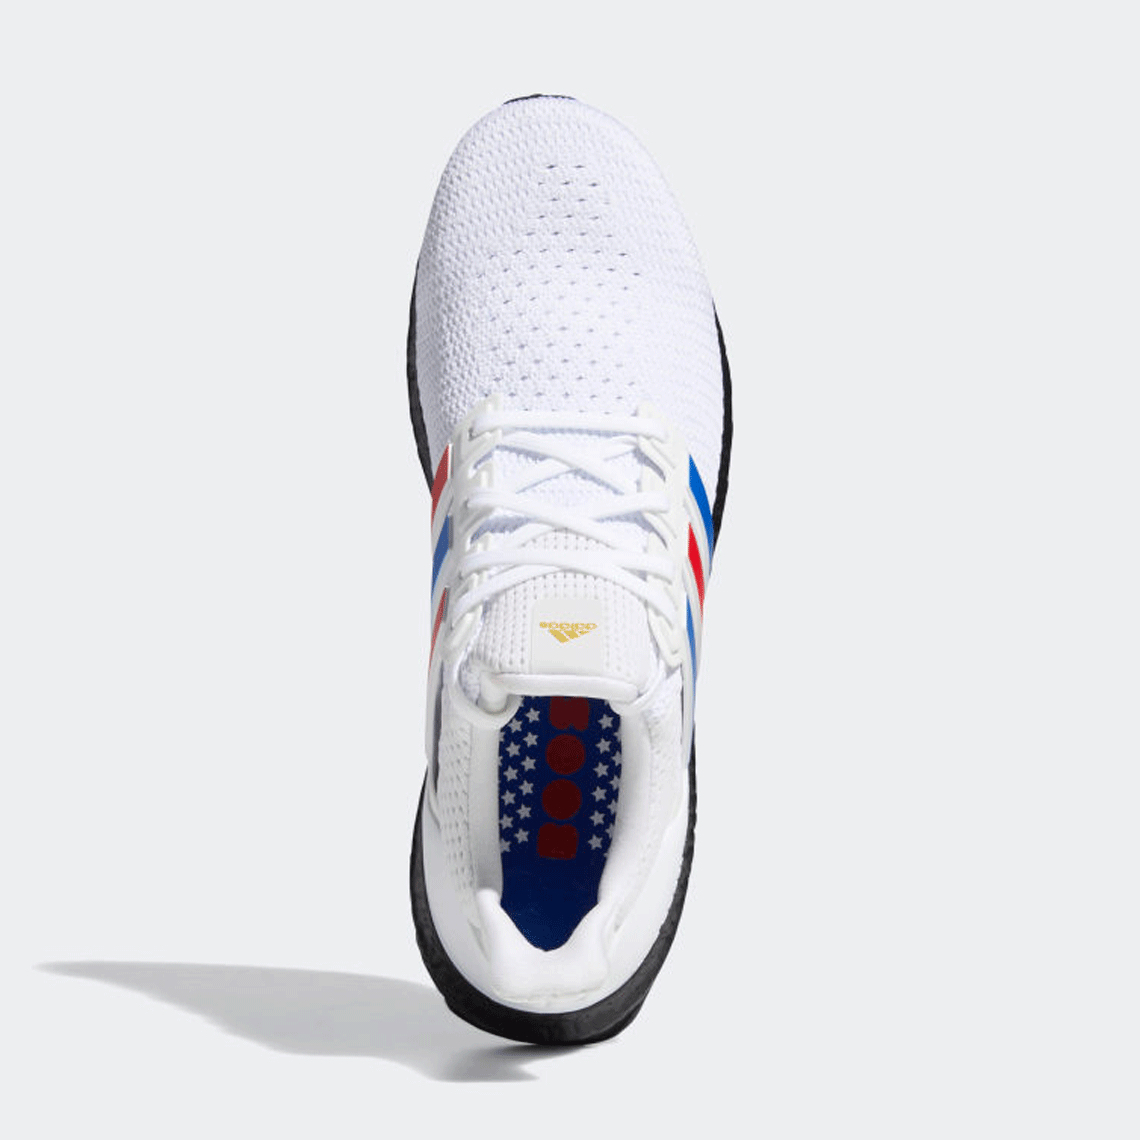 adidas Ultra Boost White Blue FY9049 | SneakerNews.com